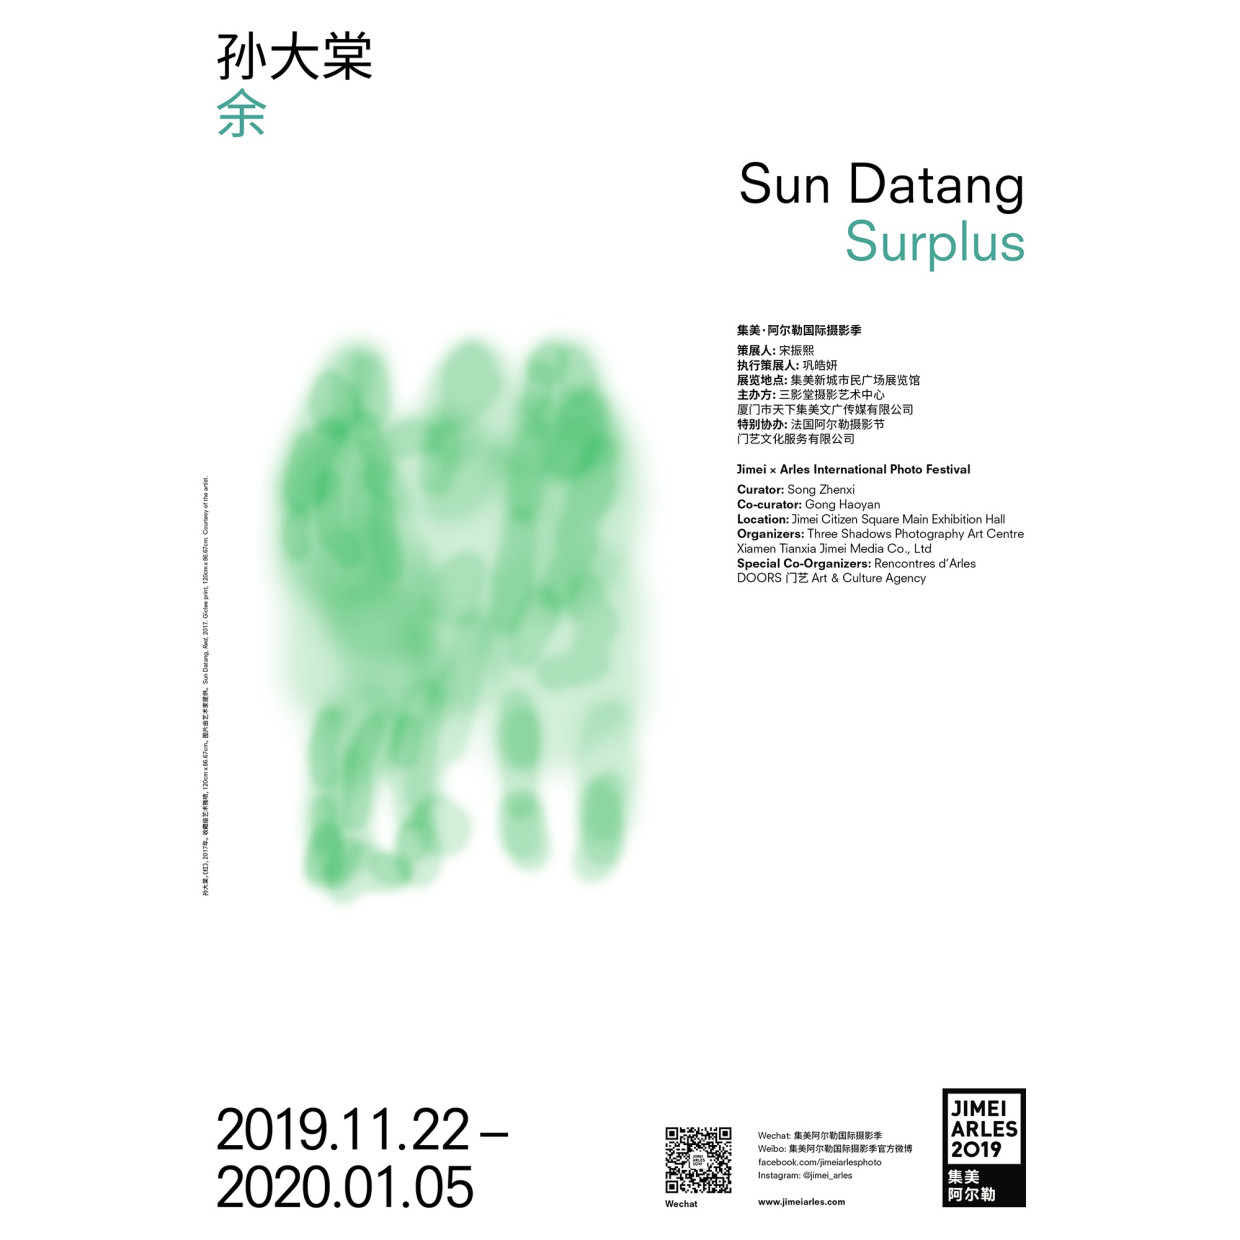 SUN DATANG SURPLUS CURATED BY SONG ZHENXI CO-CURATED BY GONG HAOYAN Having excess, or “surplus,” is a common phenomenon that...